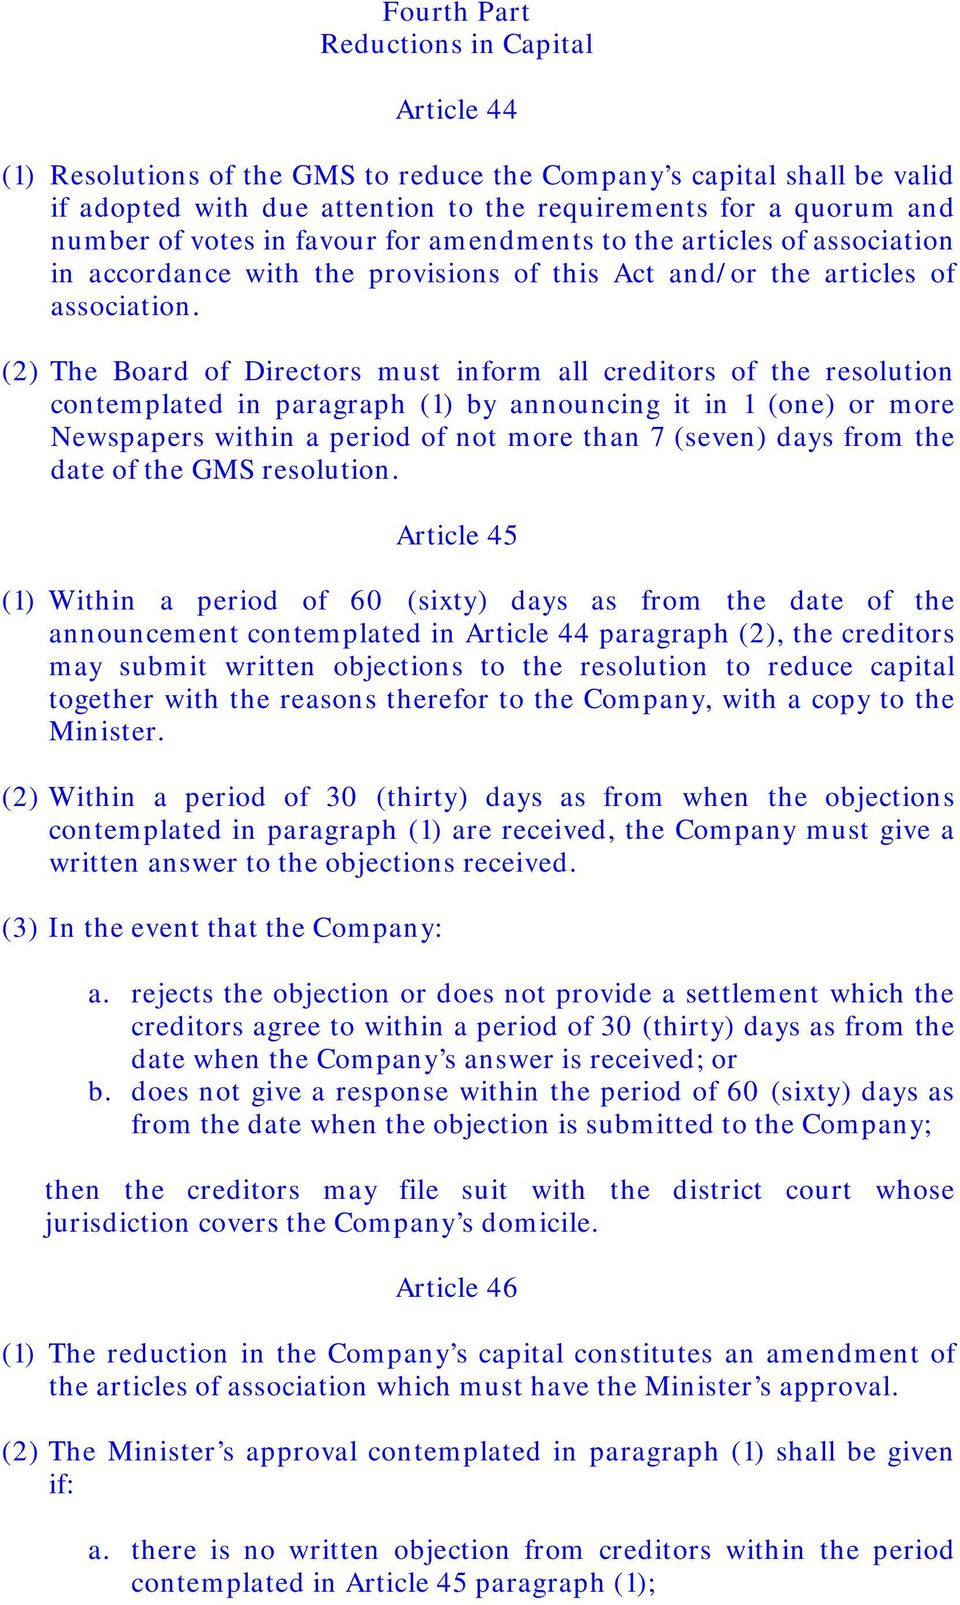 (2) The Board of Directors must inform all creditors of the resolution contemplated in paragraph (1) by announcing it in 1 (one) or more Newspapers within a period of not more than 7 (seven) days